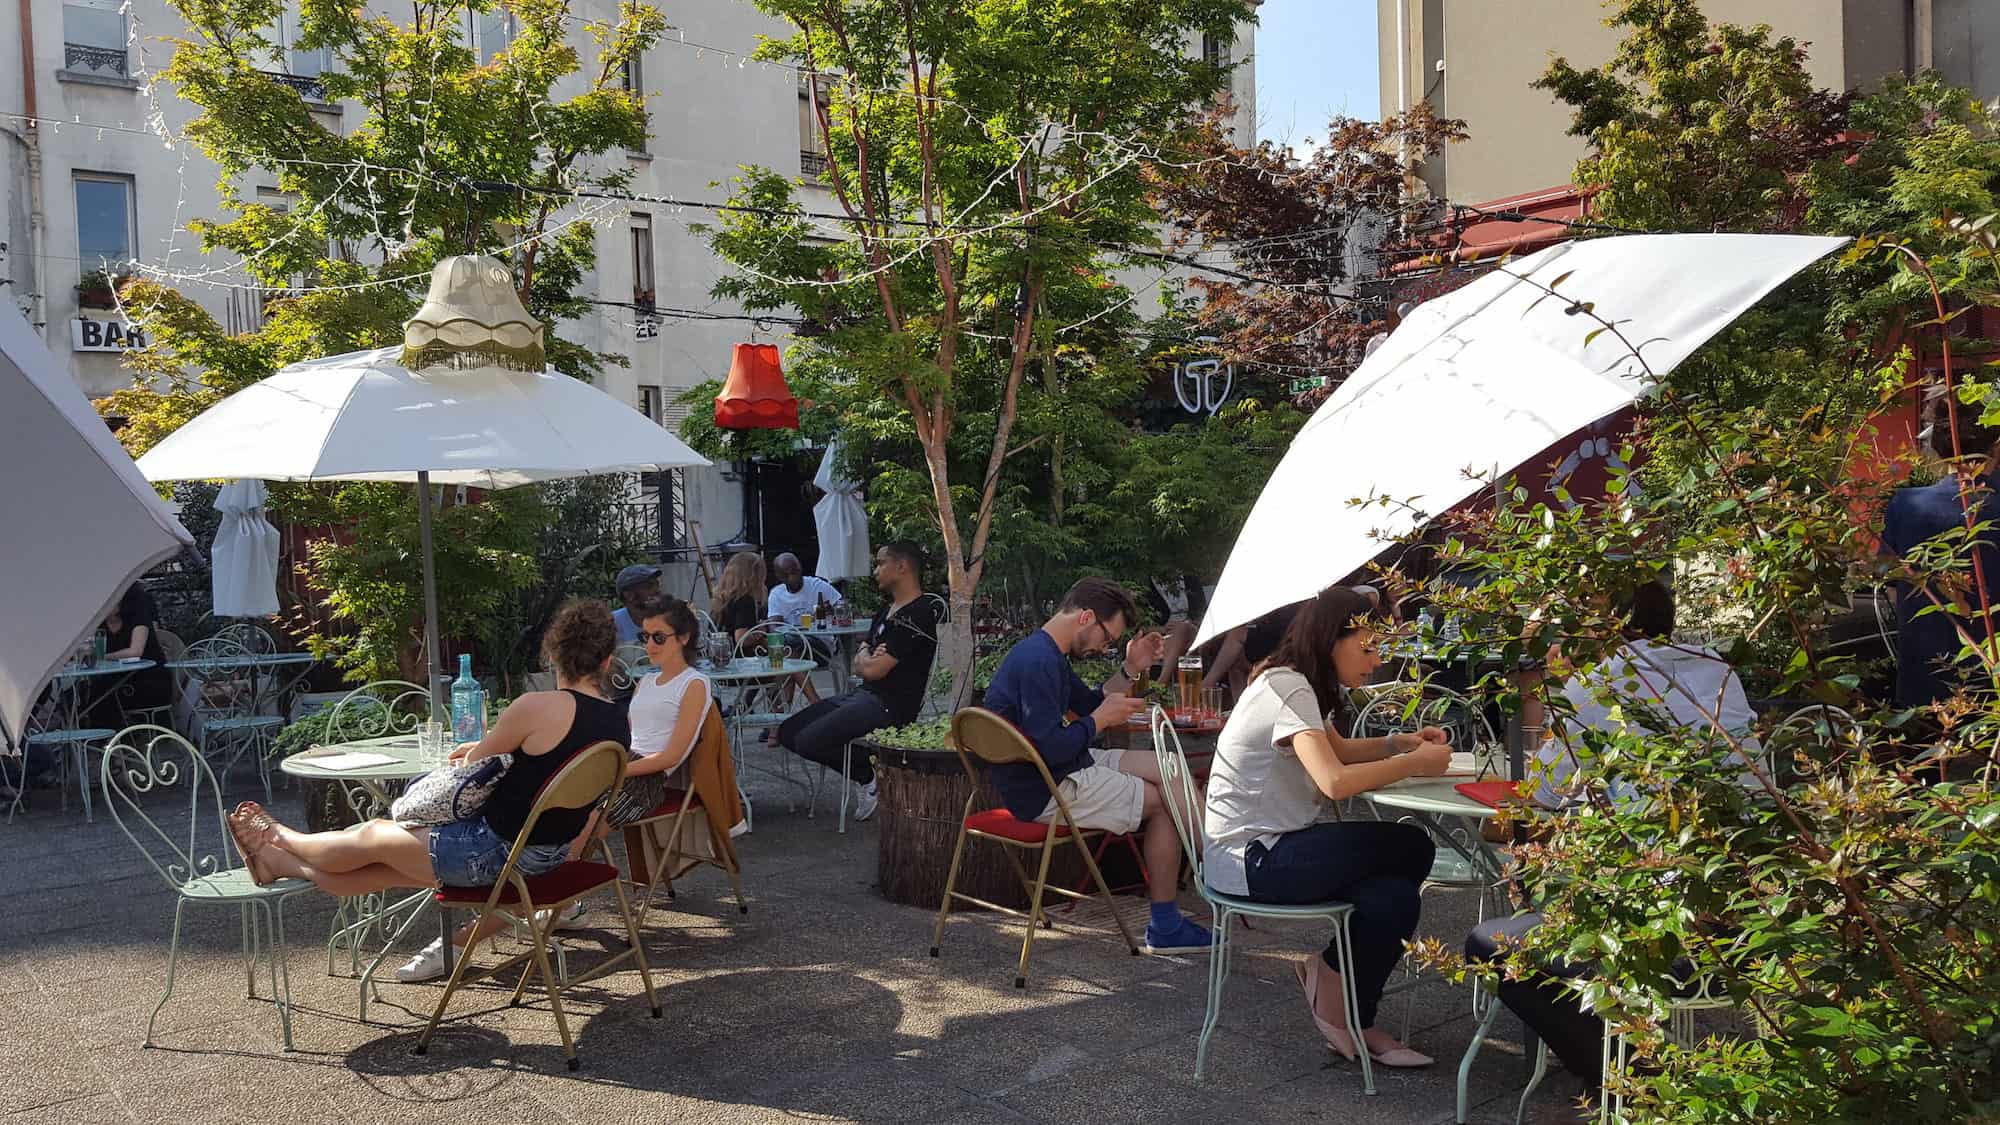 Best rooftop bar in Paris' Pigalle neighborhood is Le Bar à Bulles with its leafy terrace and fairylights.